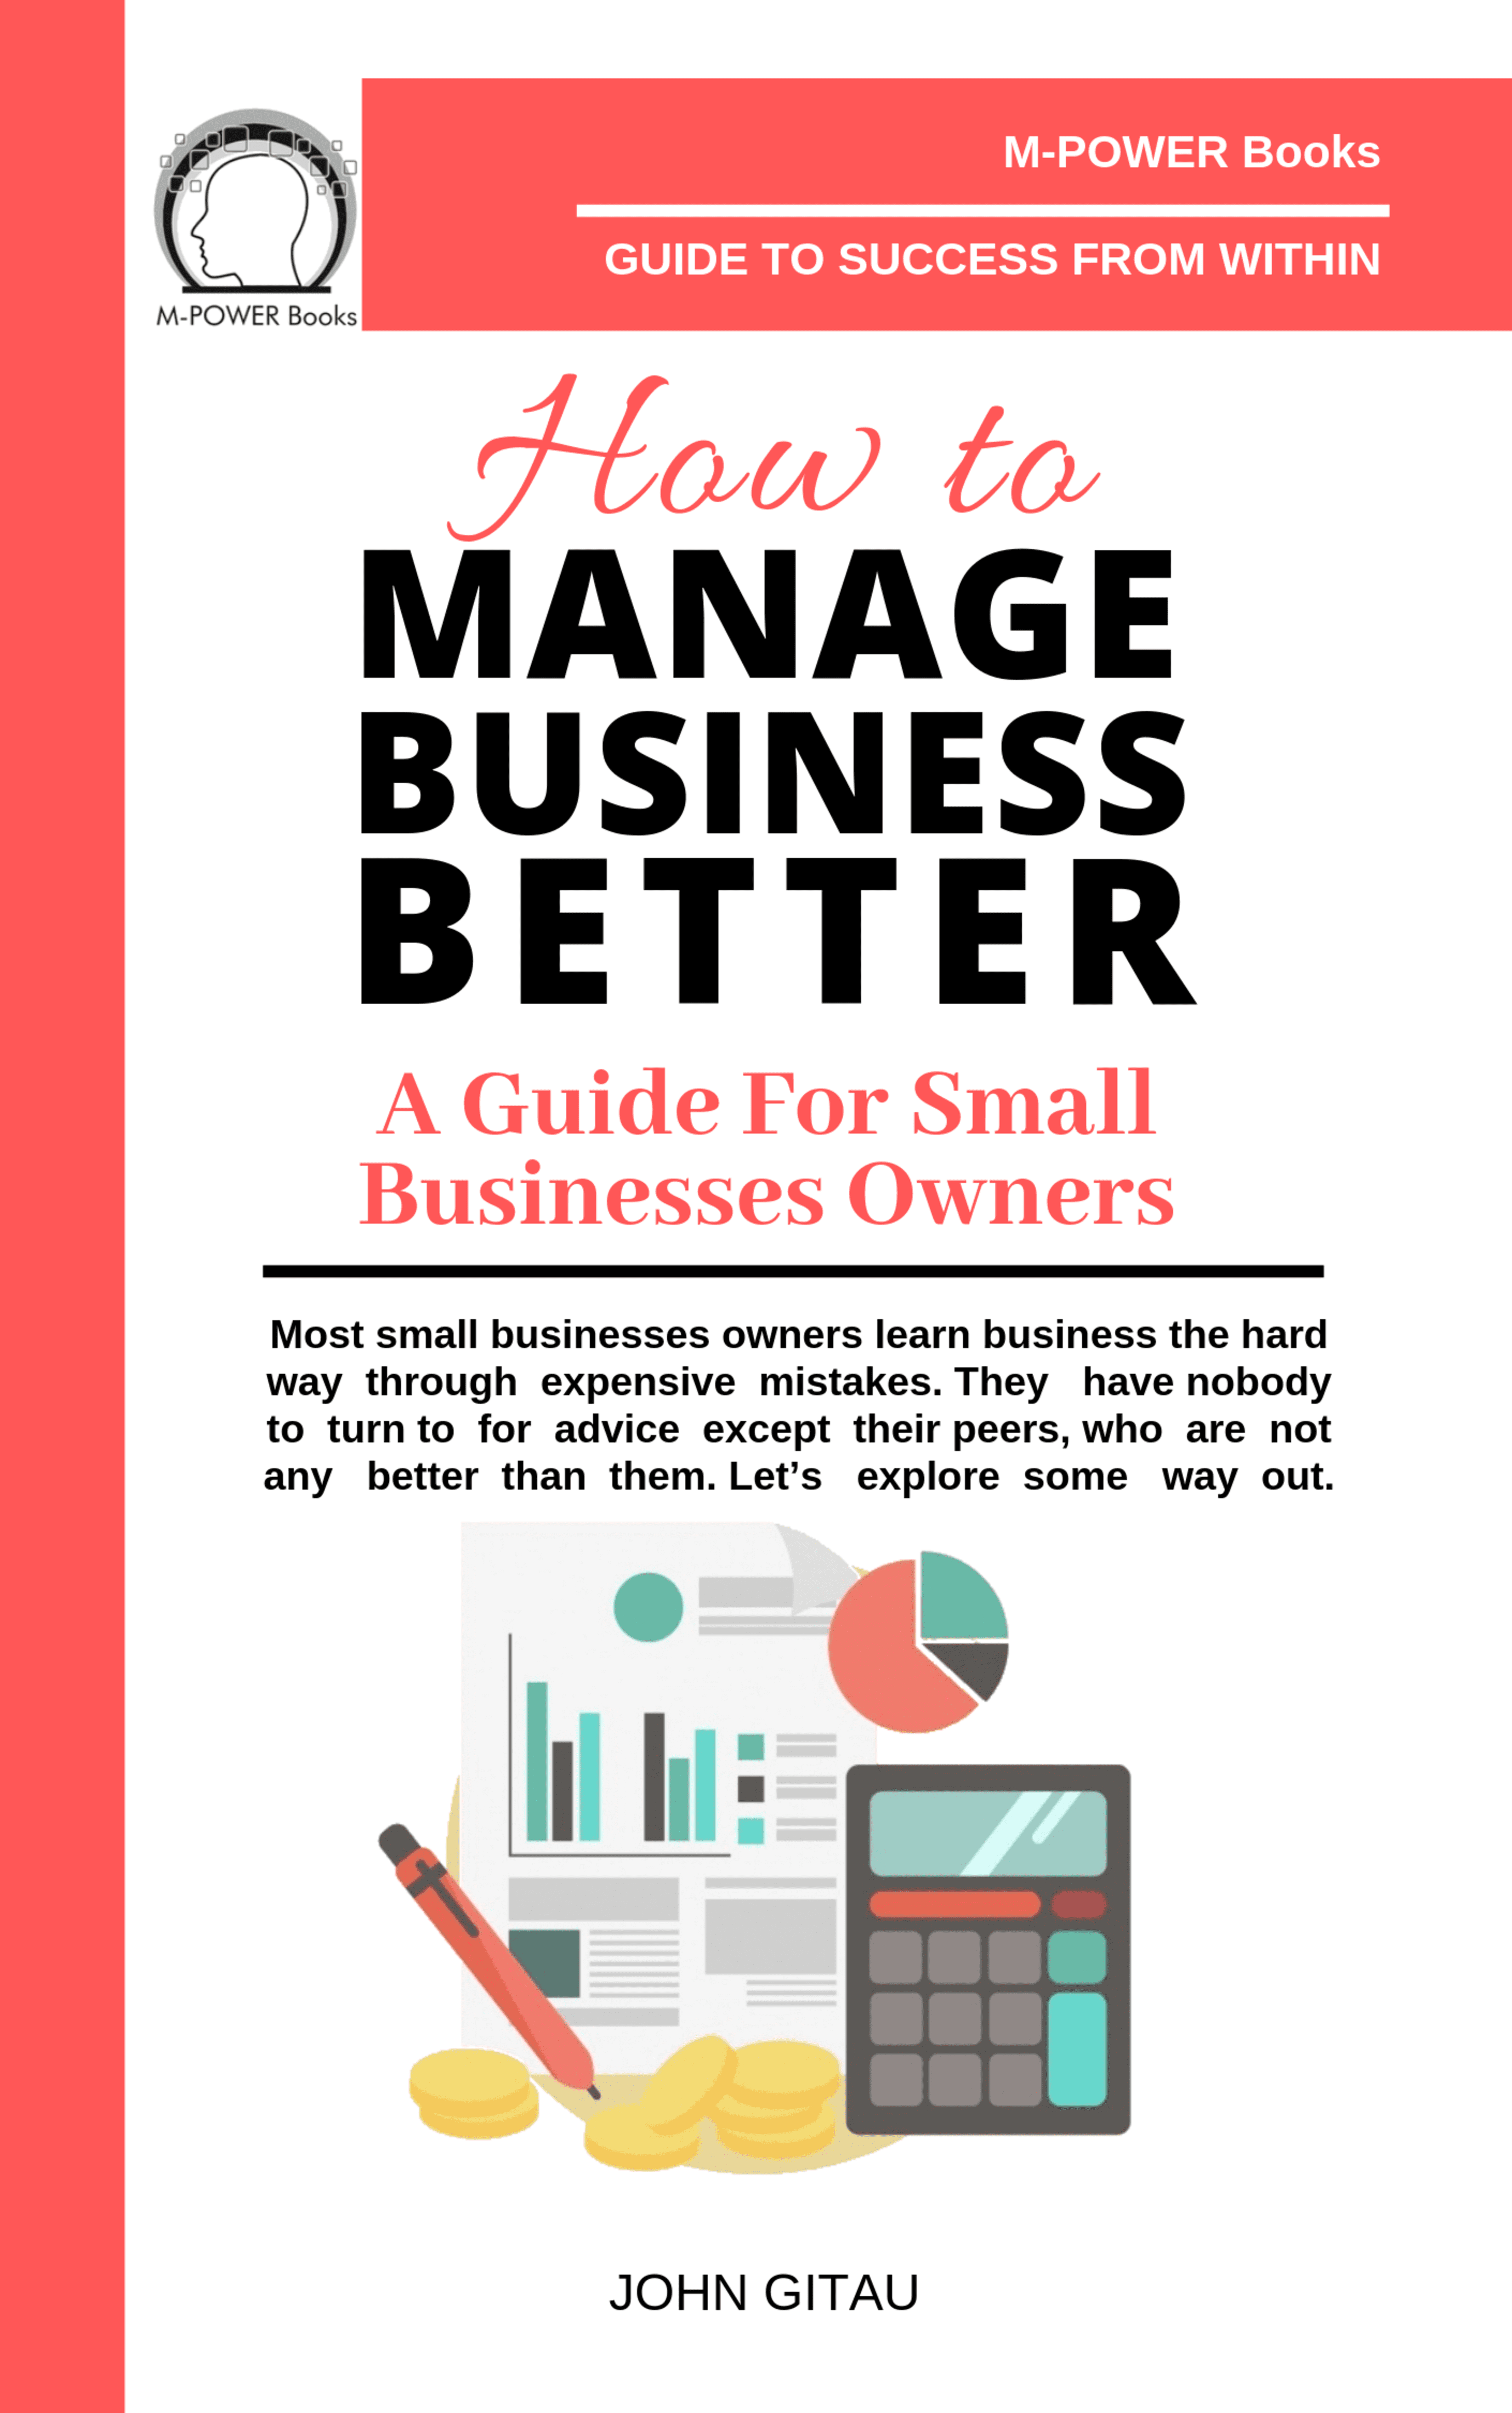 How to manage business better